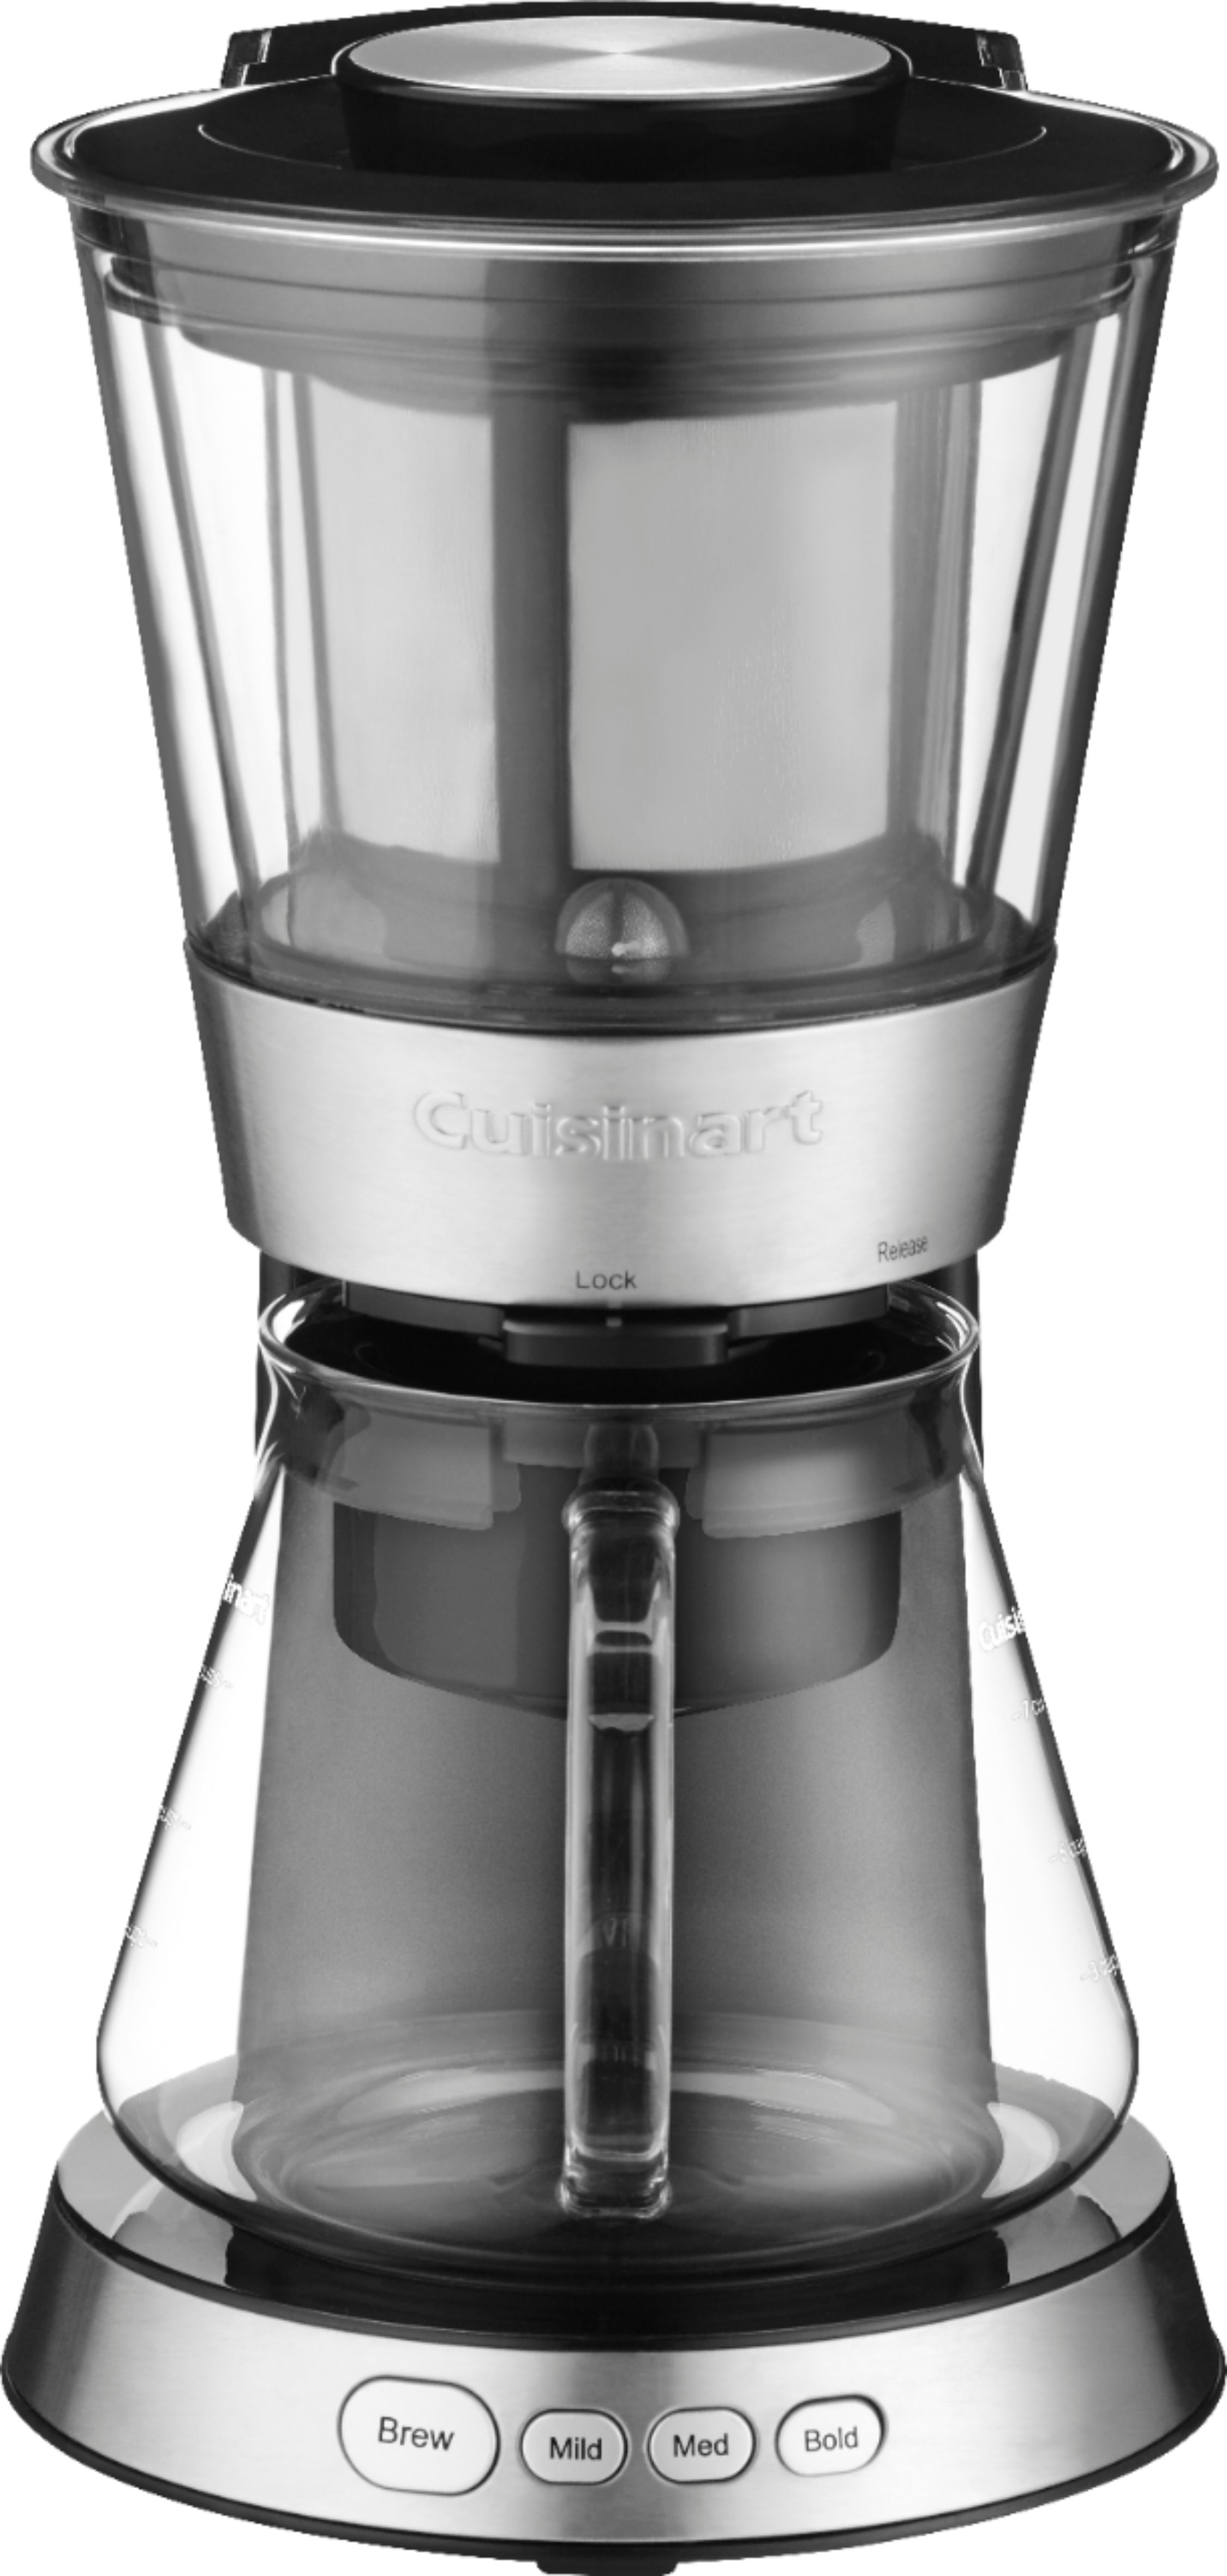 Cuisinart 7-Cup Cold-Brew Coffee Maker Black stainless DCB-10 - Best Buy